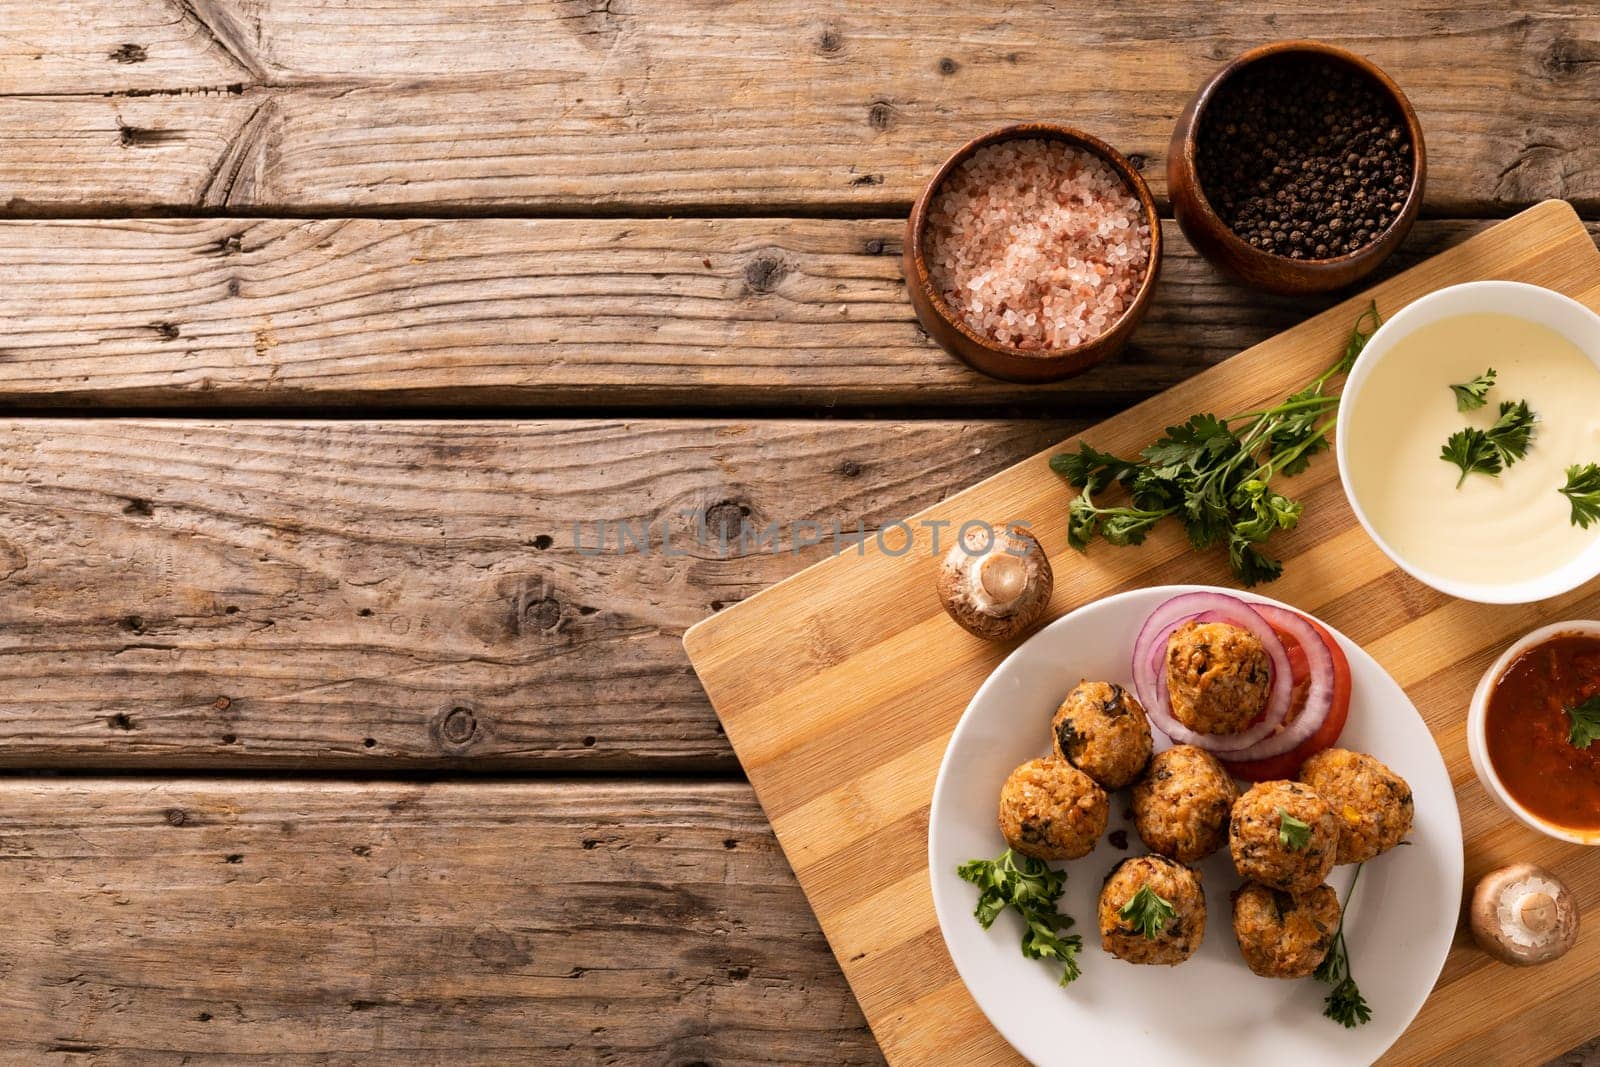 Directly above view of fresh meatballs with seasoning bowls on cutting board over wooden table. unaltered, organic food and healthy eating concept.